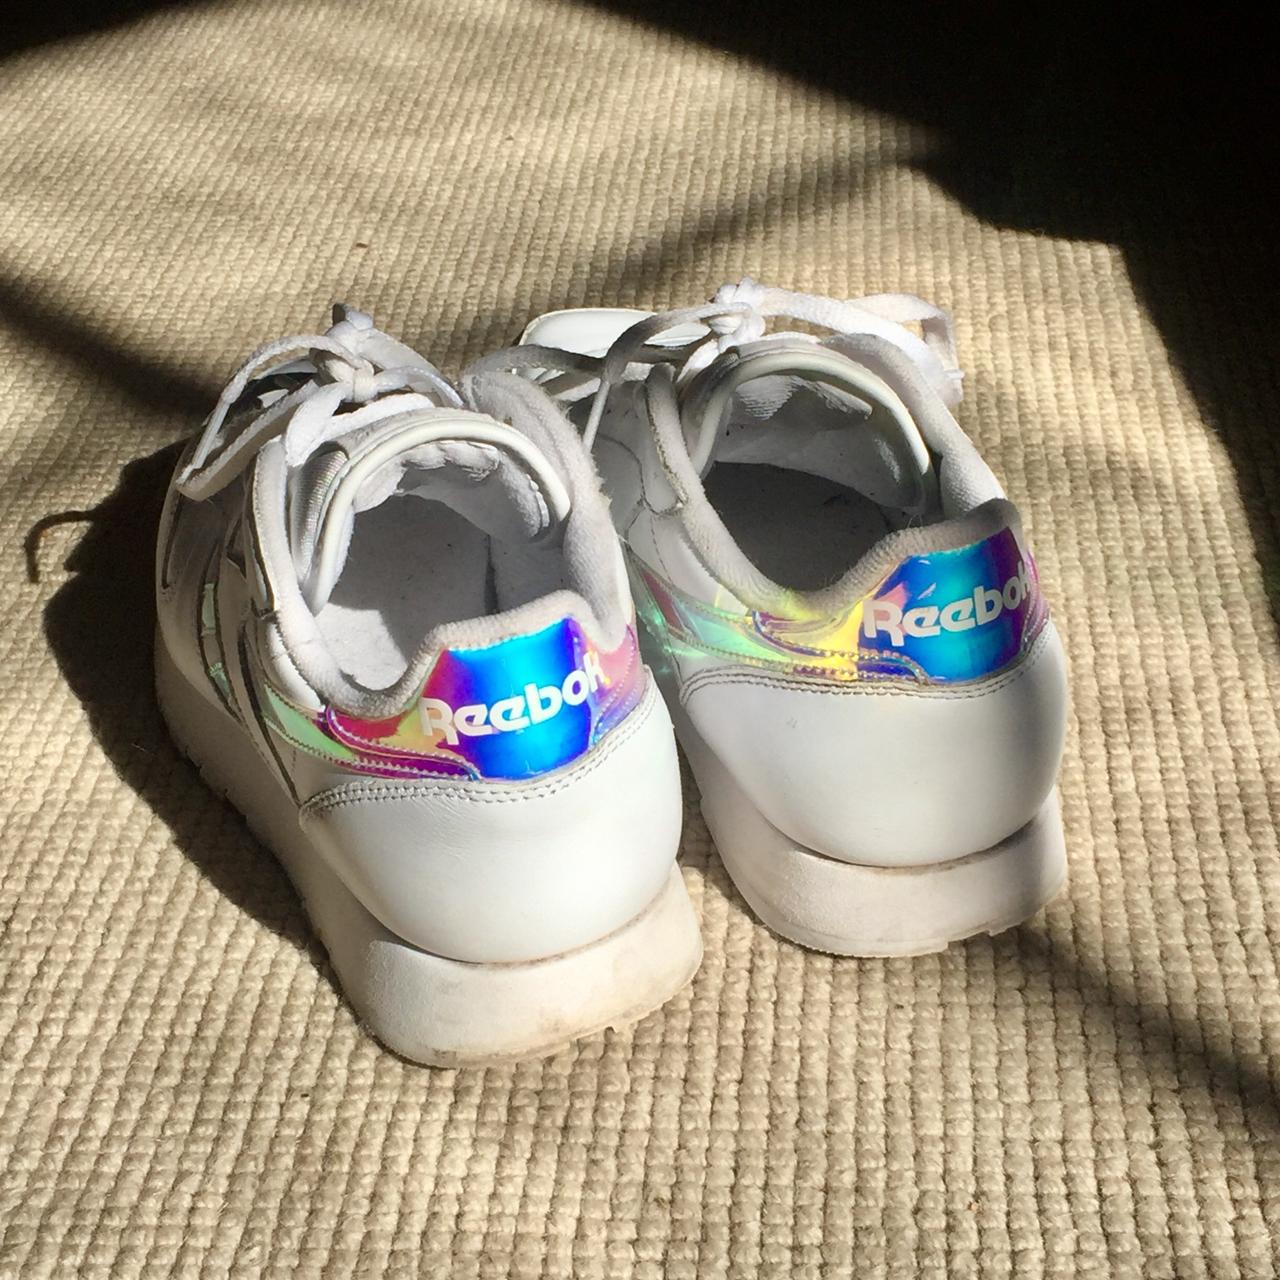 White iridescent Reebok Classic Depop Holographic... - leather